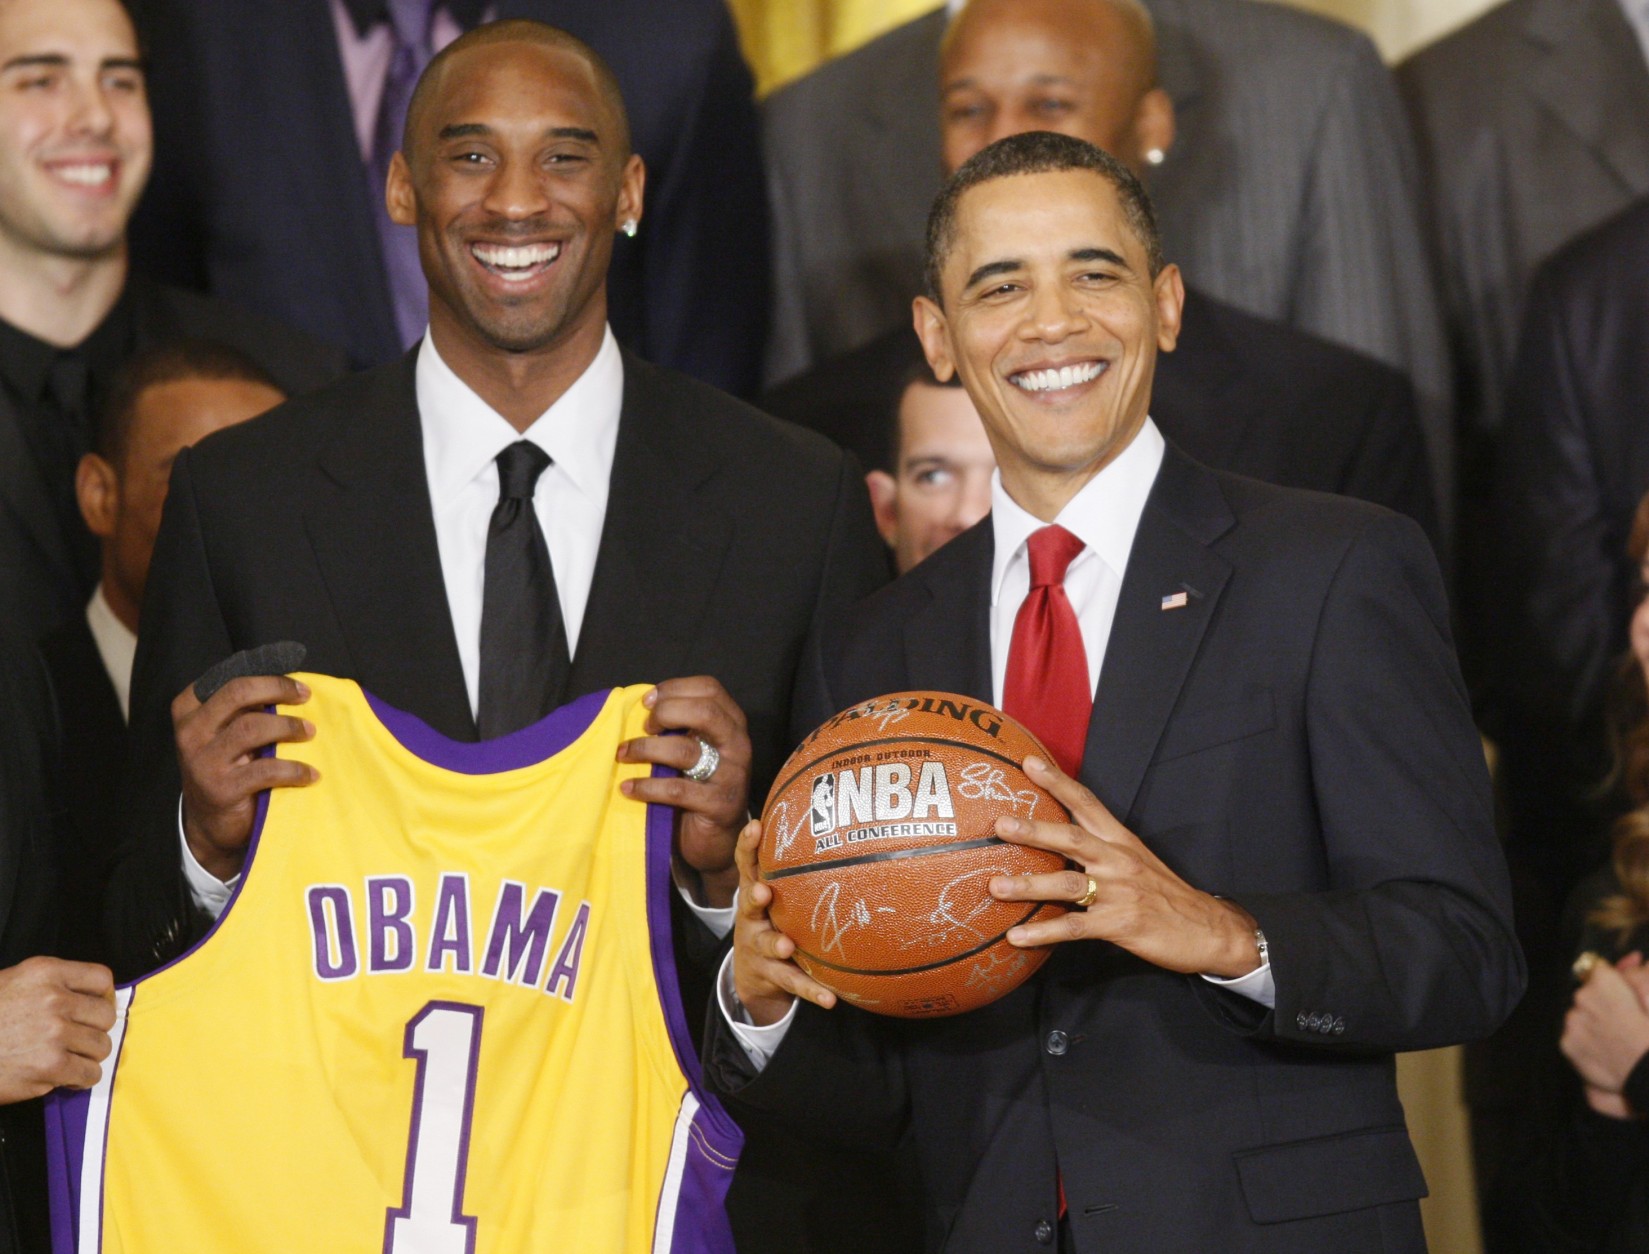 President Barack Obama stands with Los Angeles Lakers guard Kobe Bryant, in the East Room of the White House in Washington, Monday, Jan. 25, 2010, during a ceremony honoring the 2009 NBA basketball champions Los Angeles Lakers. (AP Photo/Charles Dharapak)